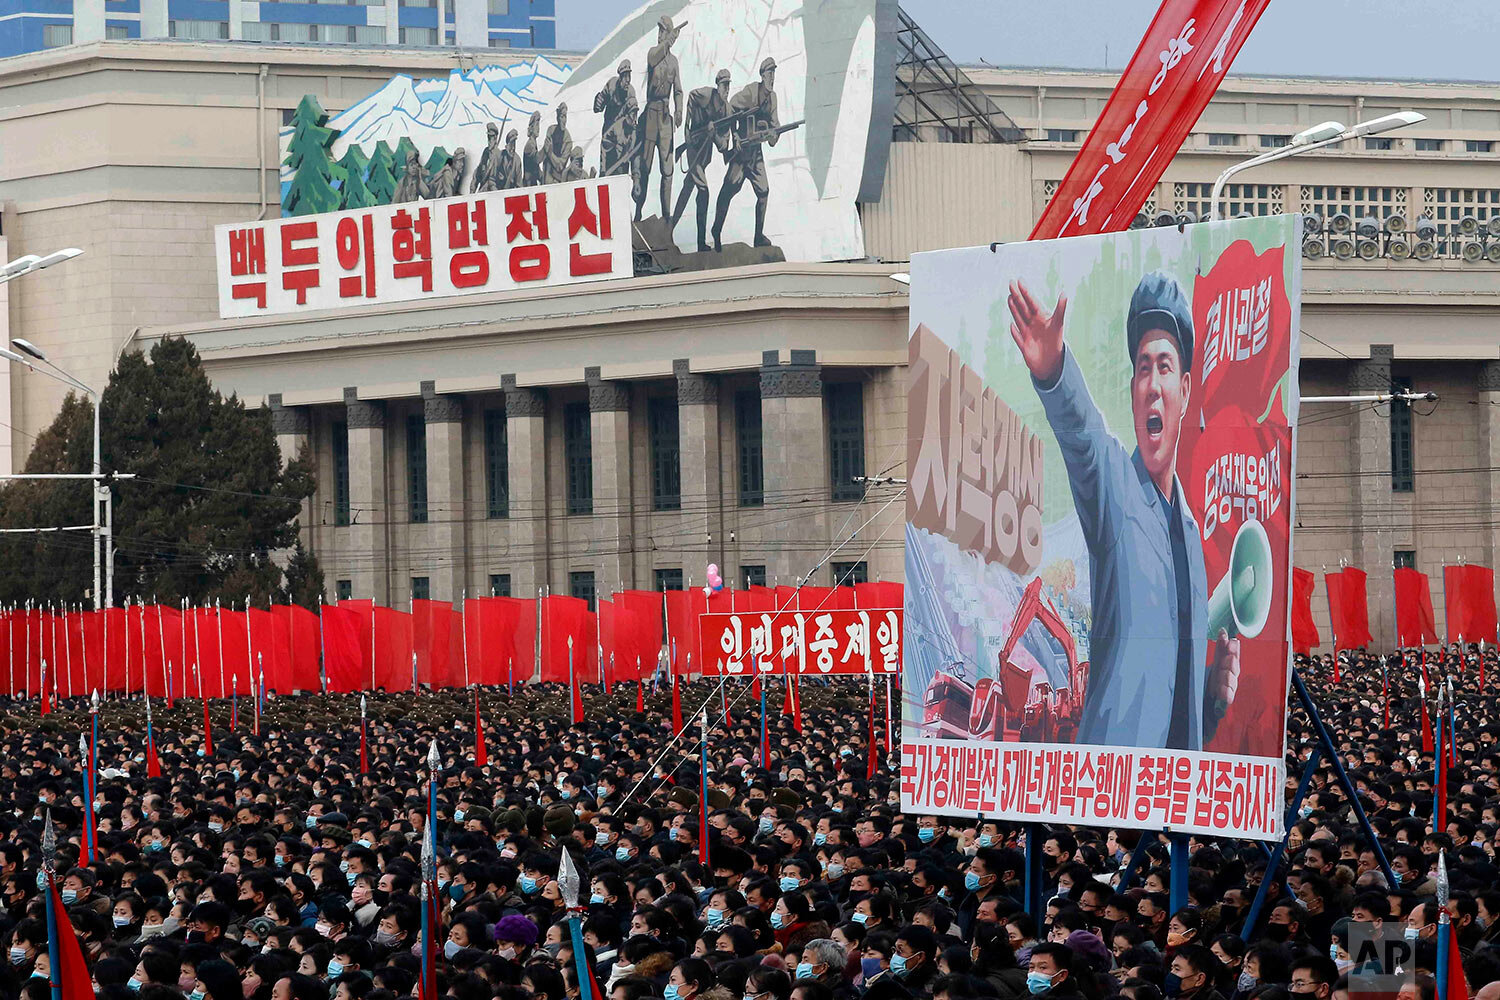  The Pyongyang city army-people rally to celebrate the election of Kim Jong Un as General Secretary of the WPK (Workers' Party of Korea), at Kim Il Sung Square in Pyongyang, North Korea, Friday Jan. 15, 2021. (AP Photo/Jon Chol Jin) 